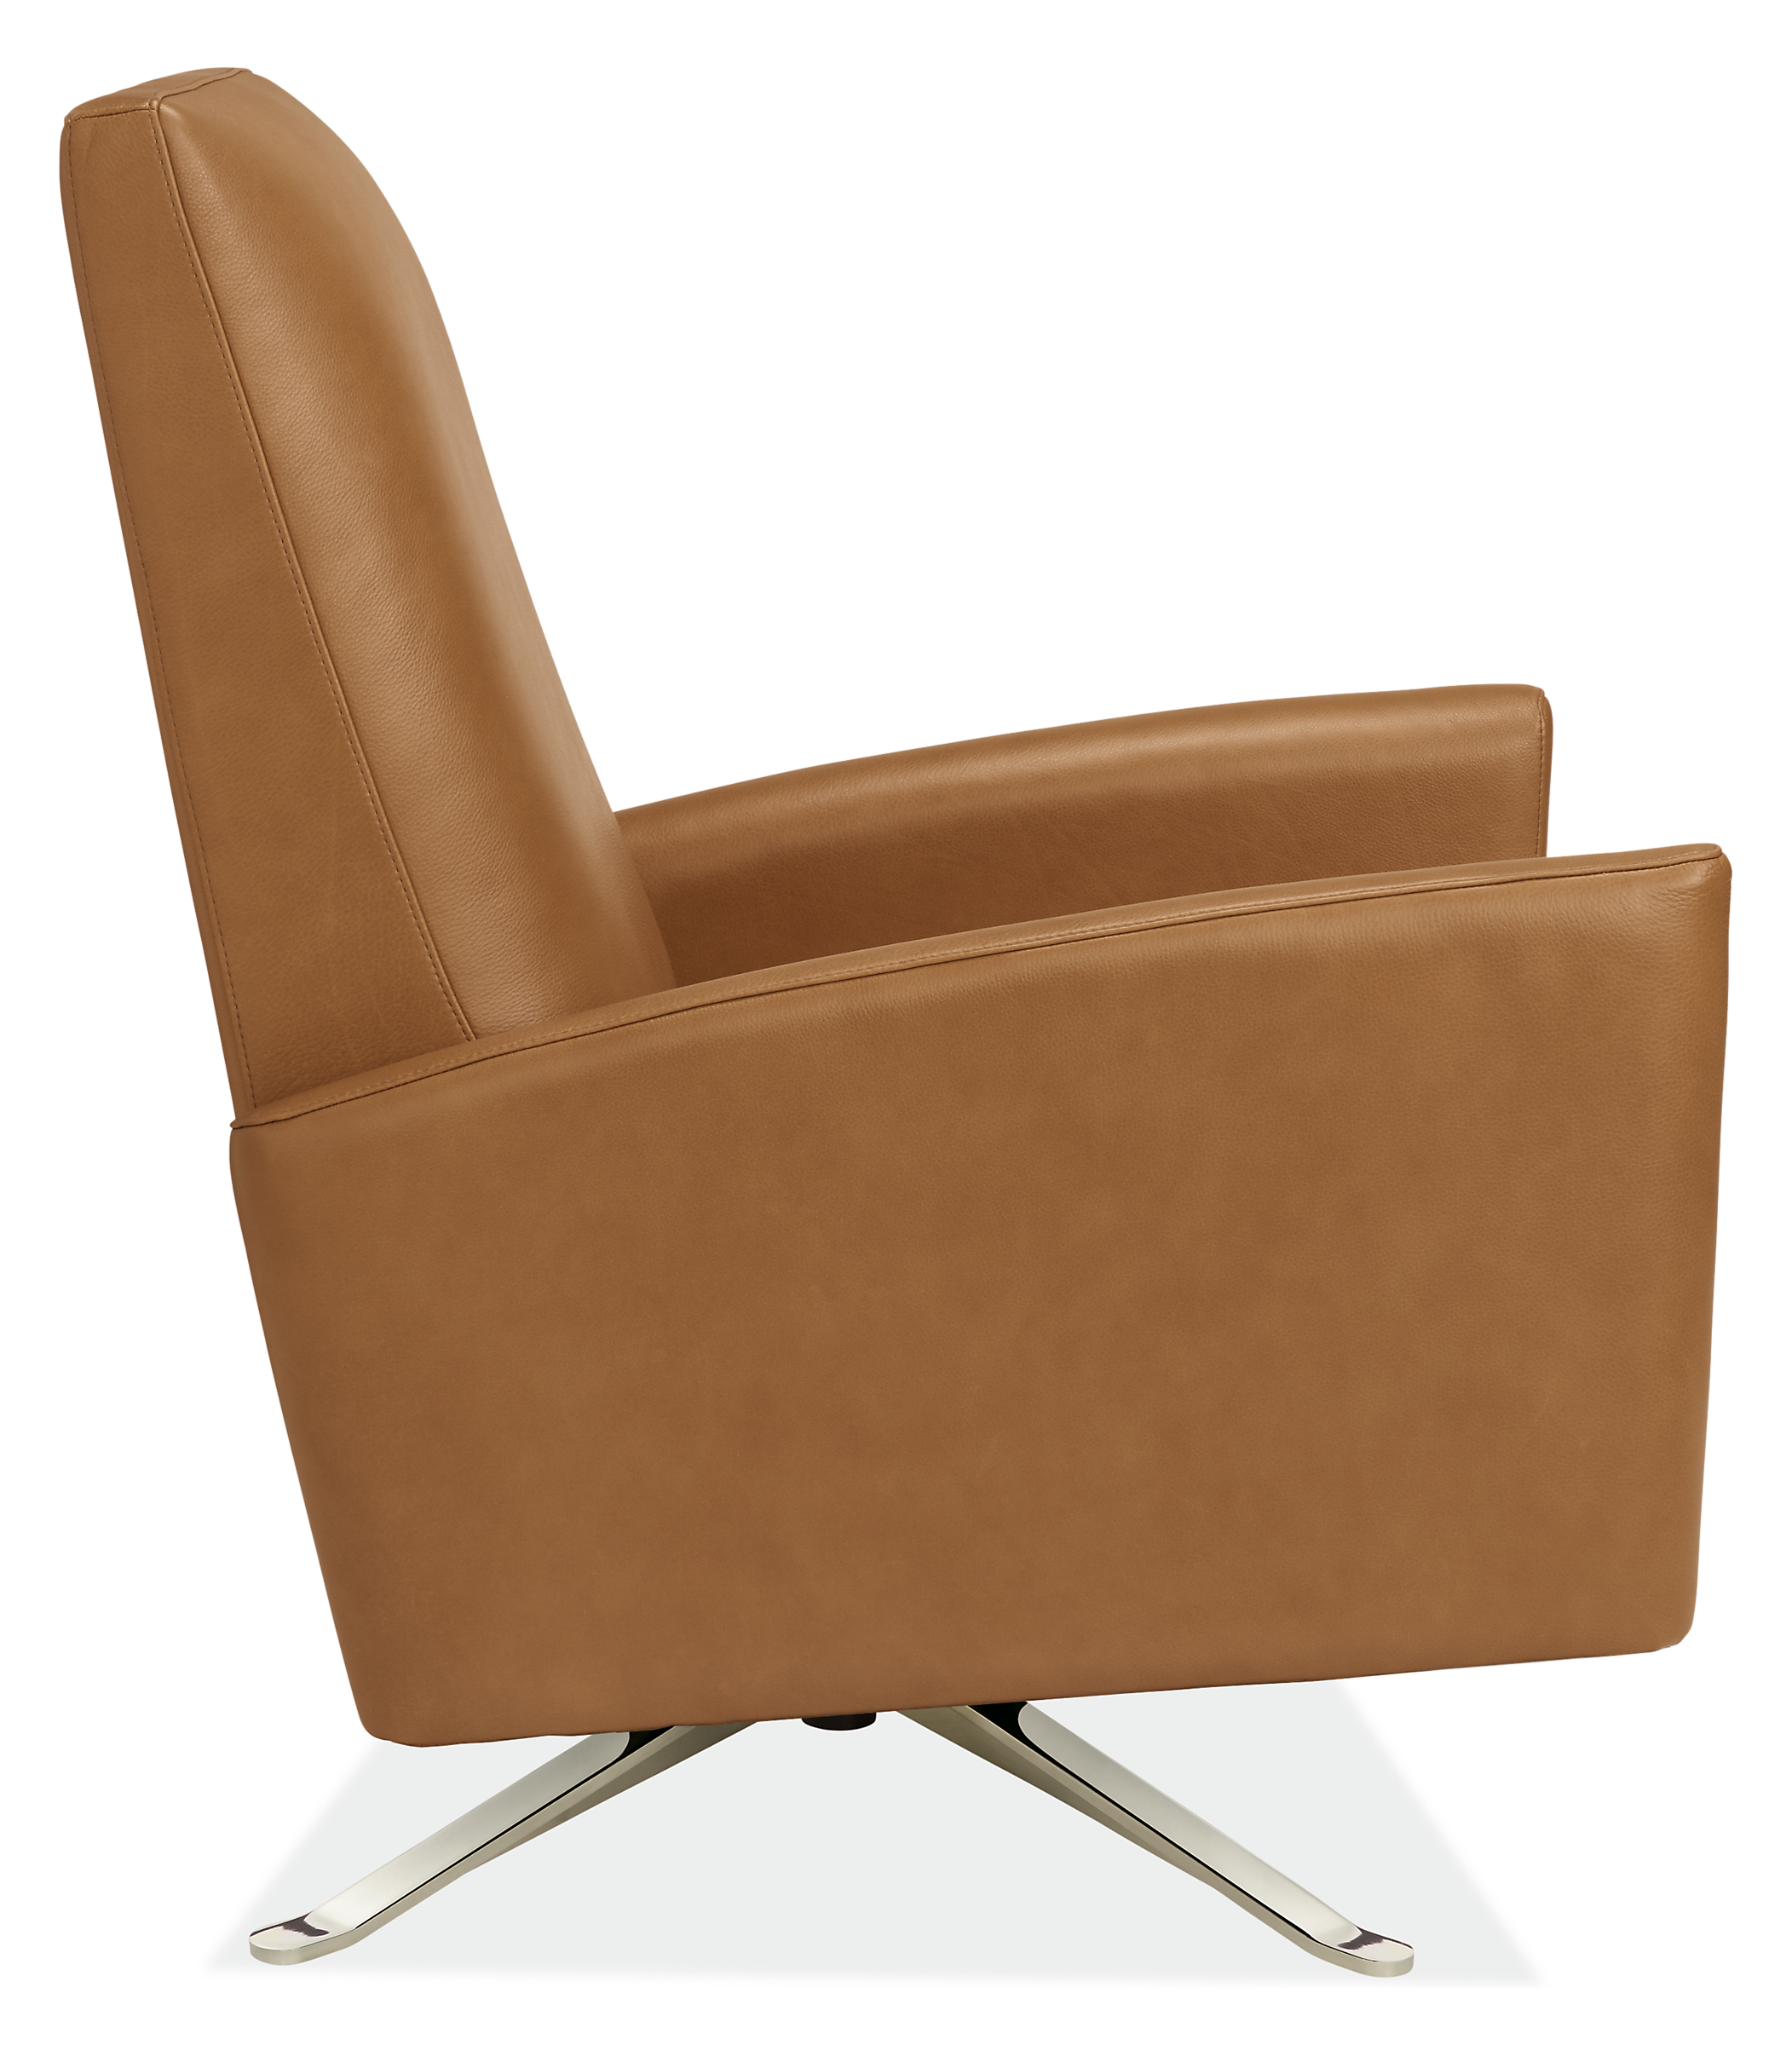 Side view of Arlo Select Curved-Arm Recliner in Lecco Leather with Metal Base.